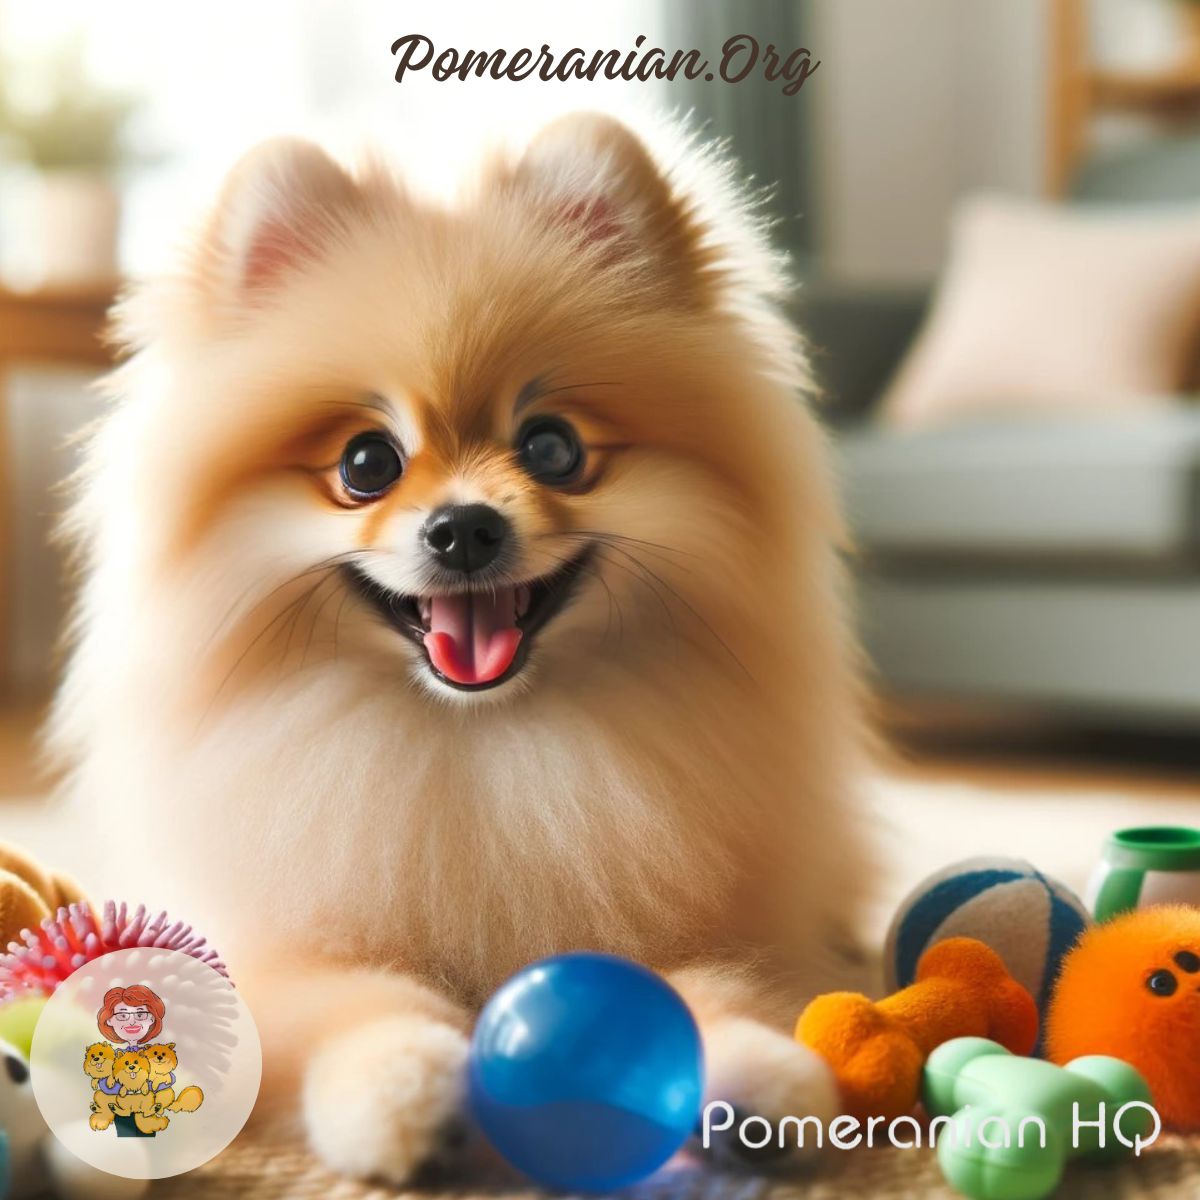 Pomeranian playing with toys